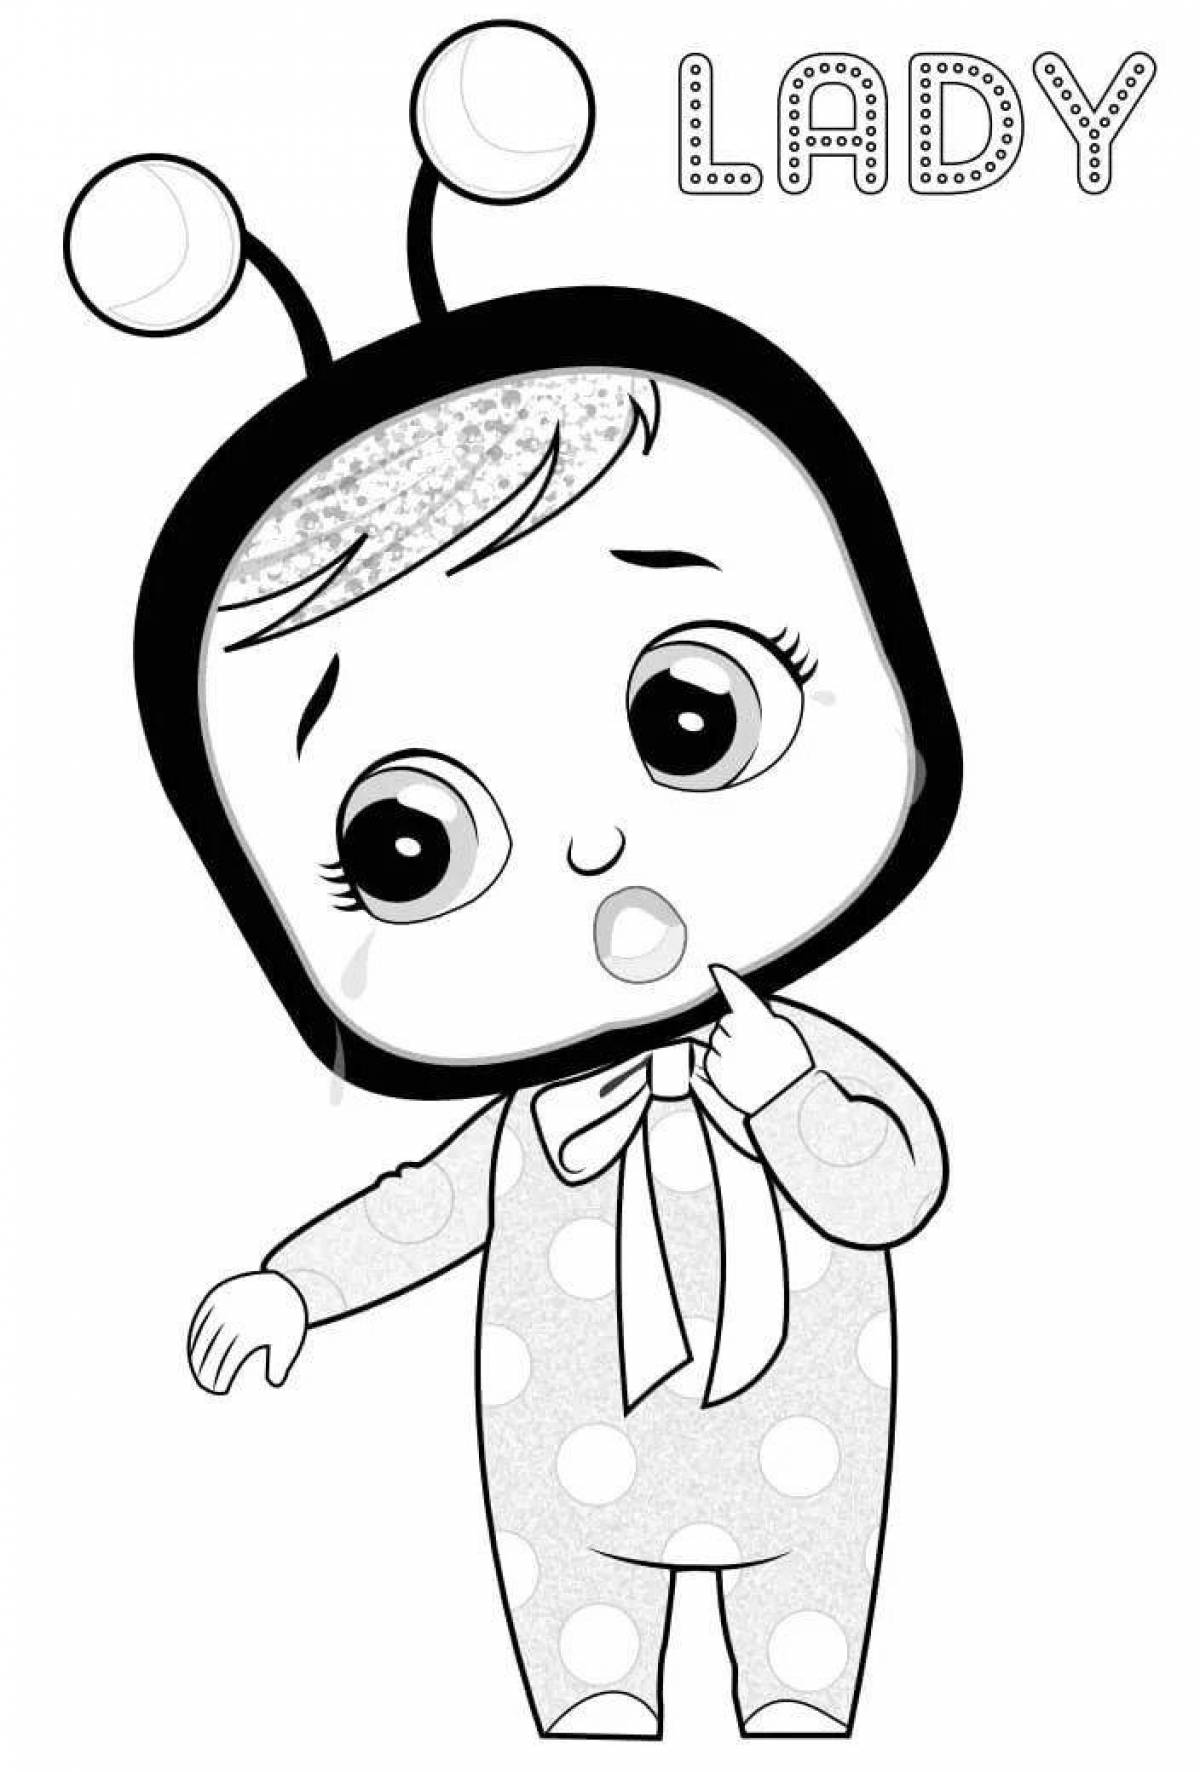 Charon baby colorful coloring page